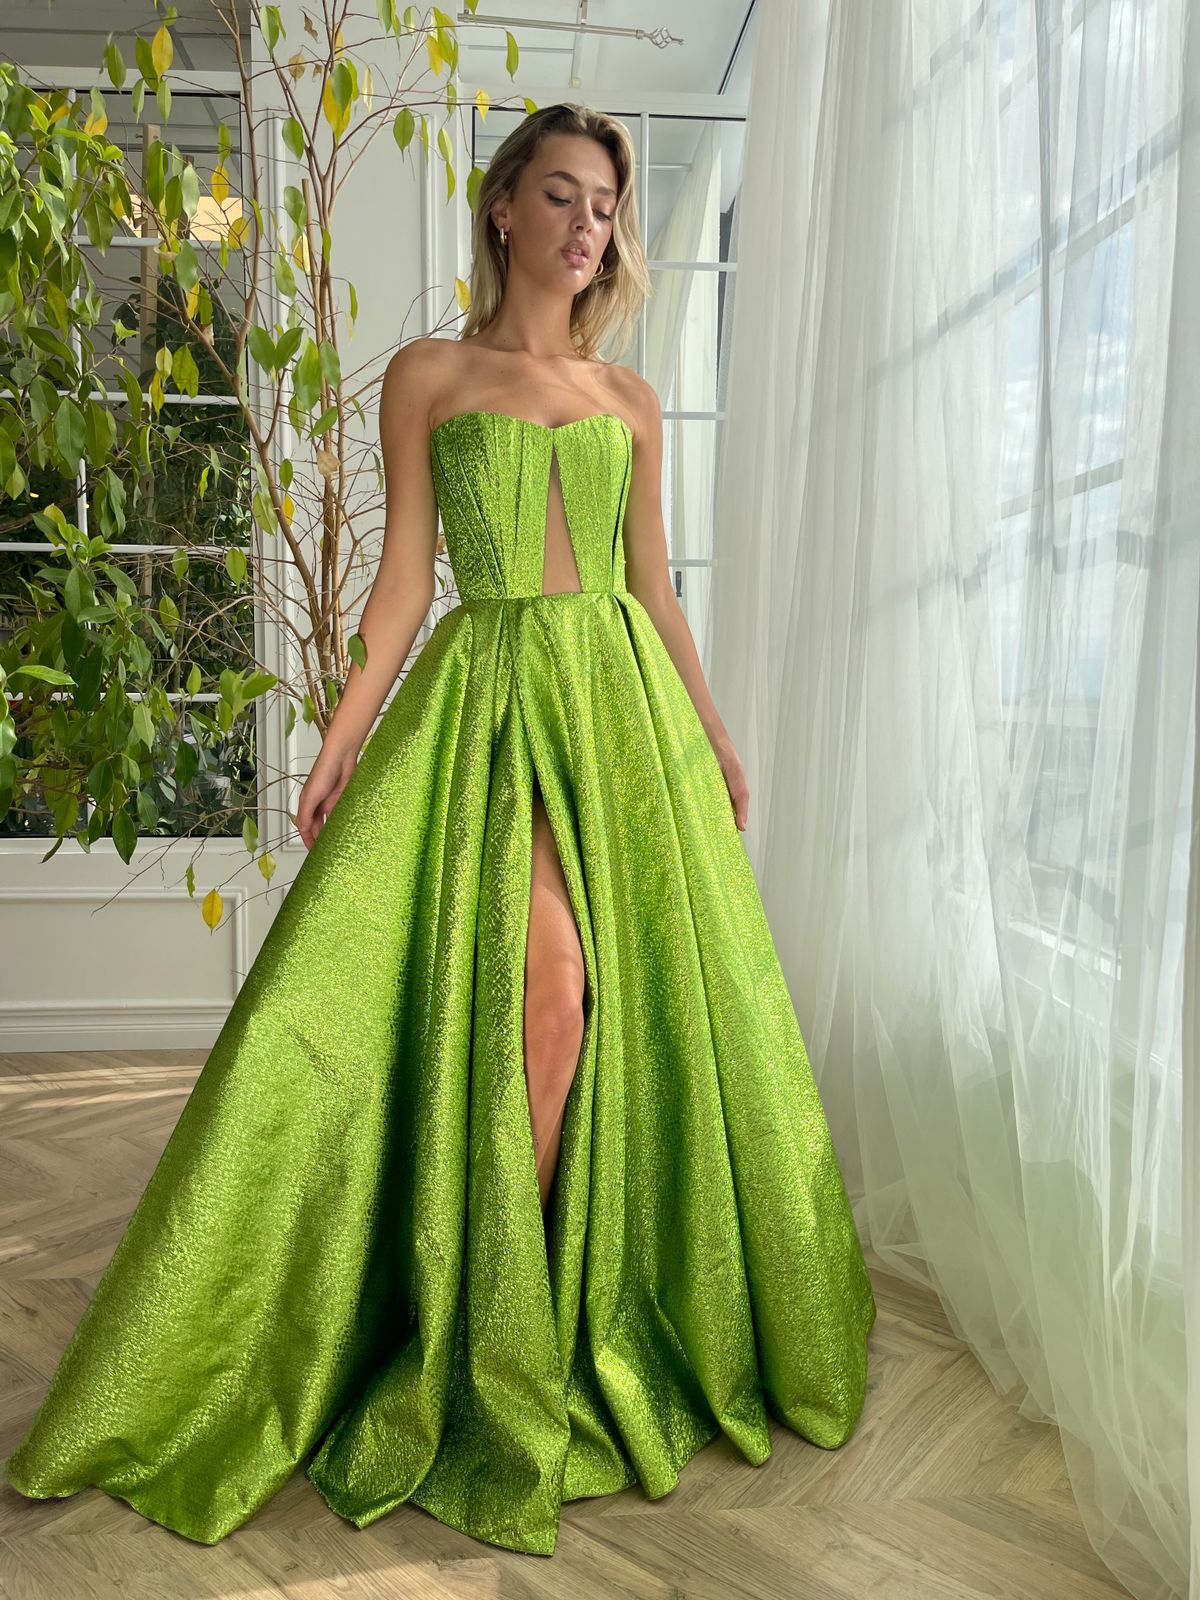 Green A-Line dress with no sleeves and shiny fabric